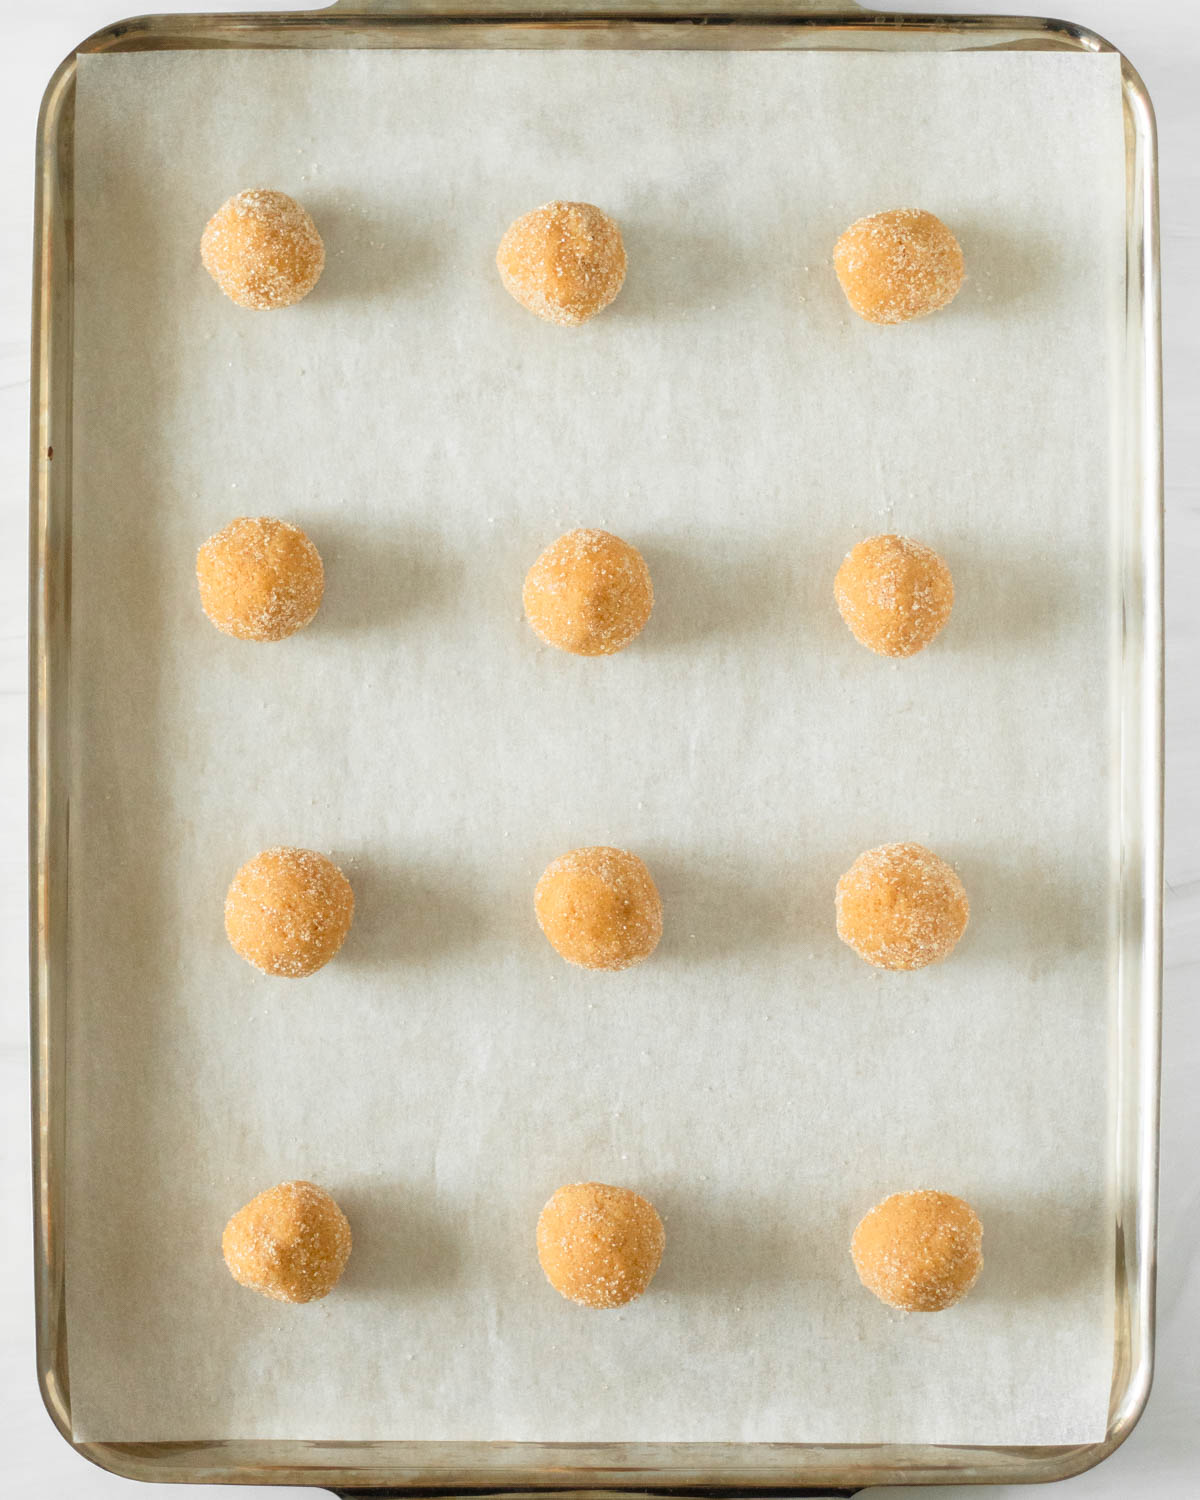 Step 3. Shape into balls, roll in sugar and place on a sheet pan